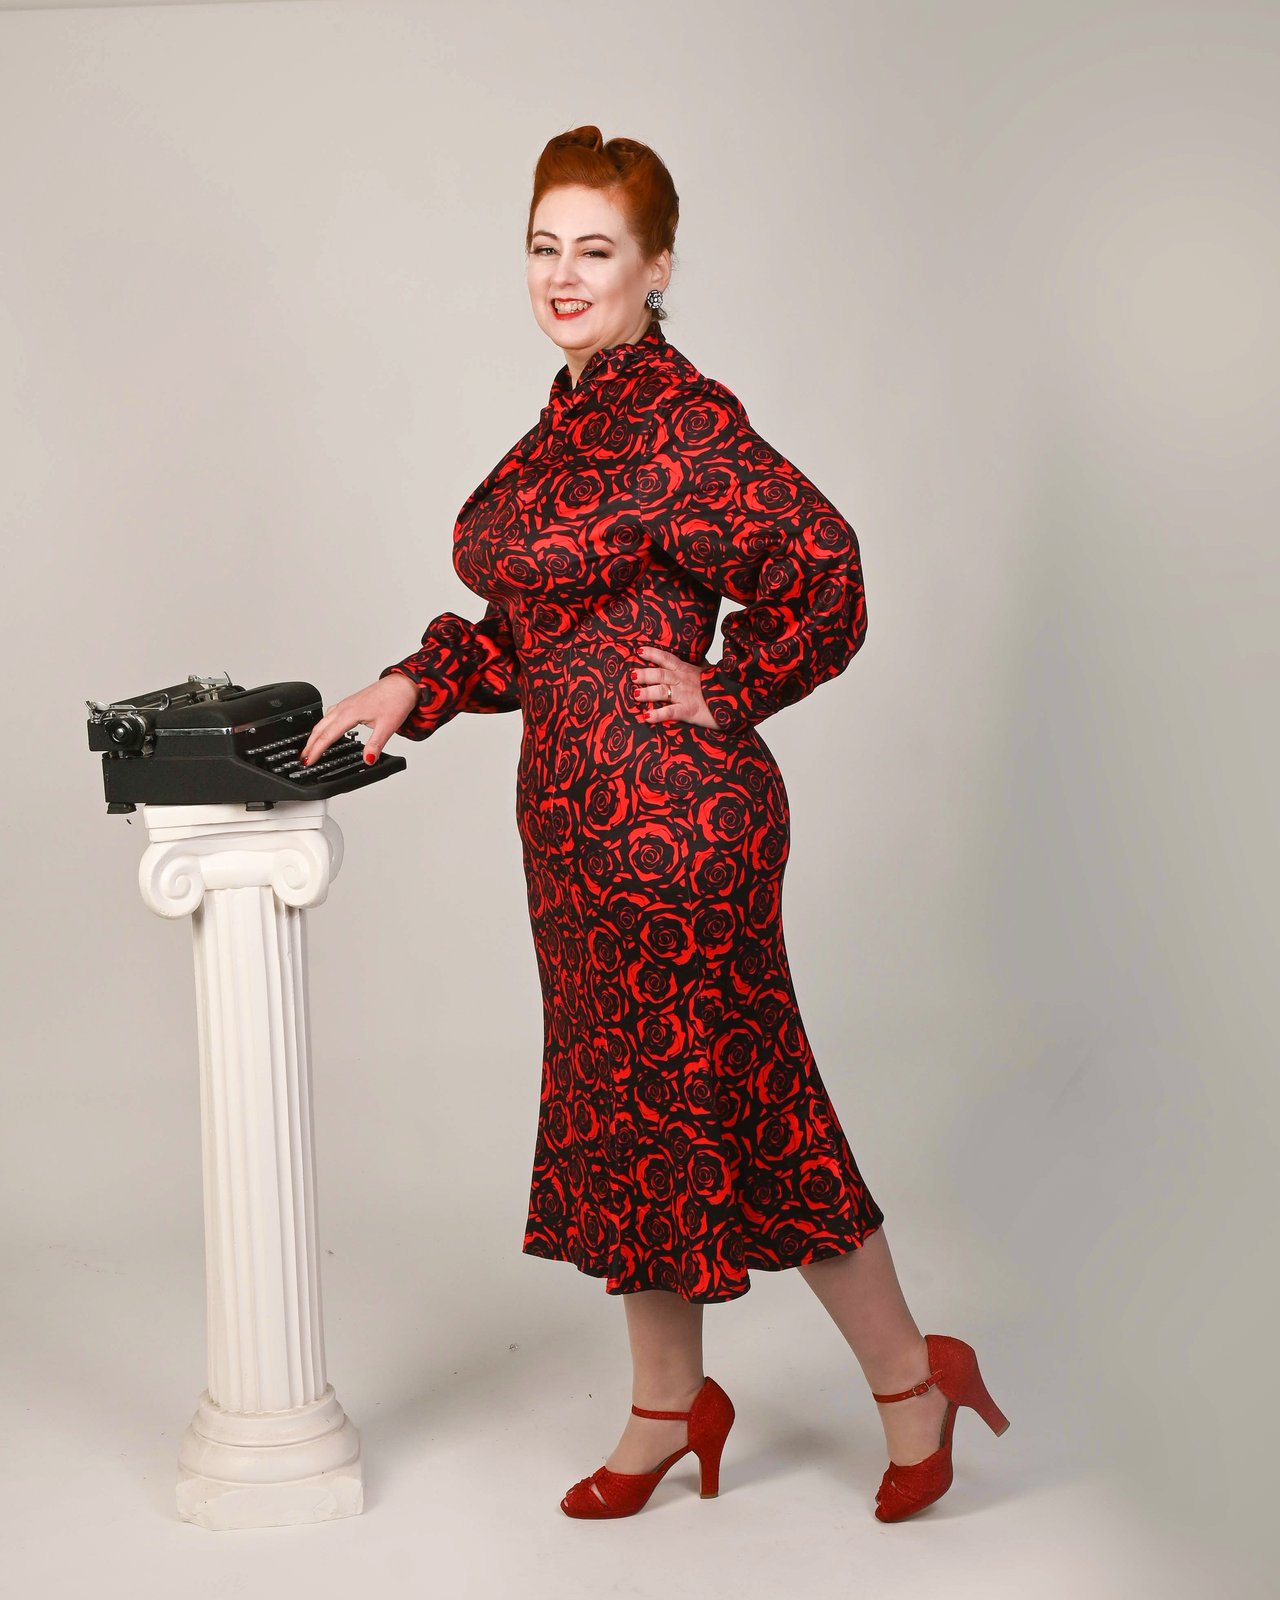 Beth Ann Gallagher standing and wearing a red and black rose print dress and red ankle strap high heels while writing on an old fashioned, black typewriter, atop a white, Greek style pedastal.